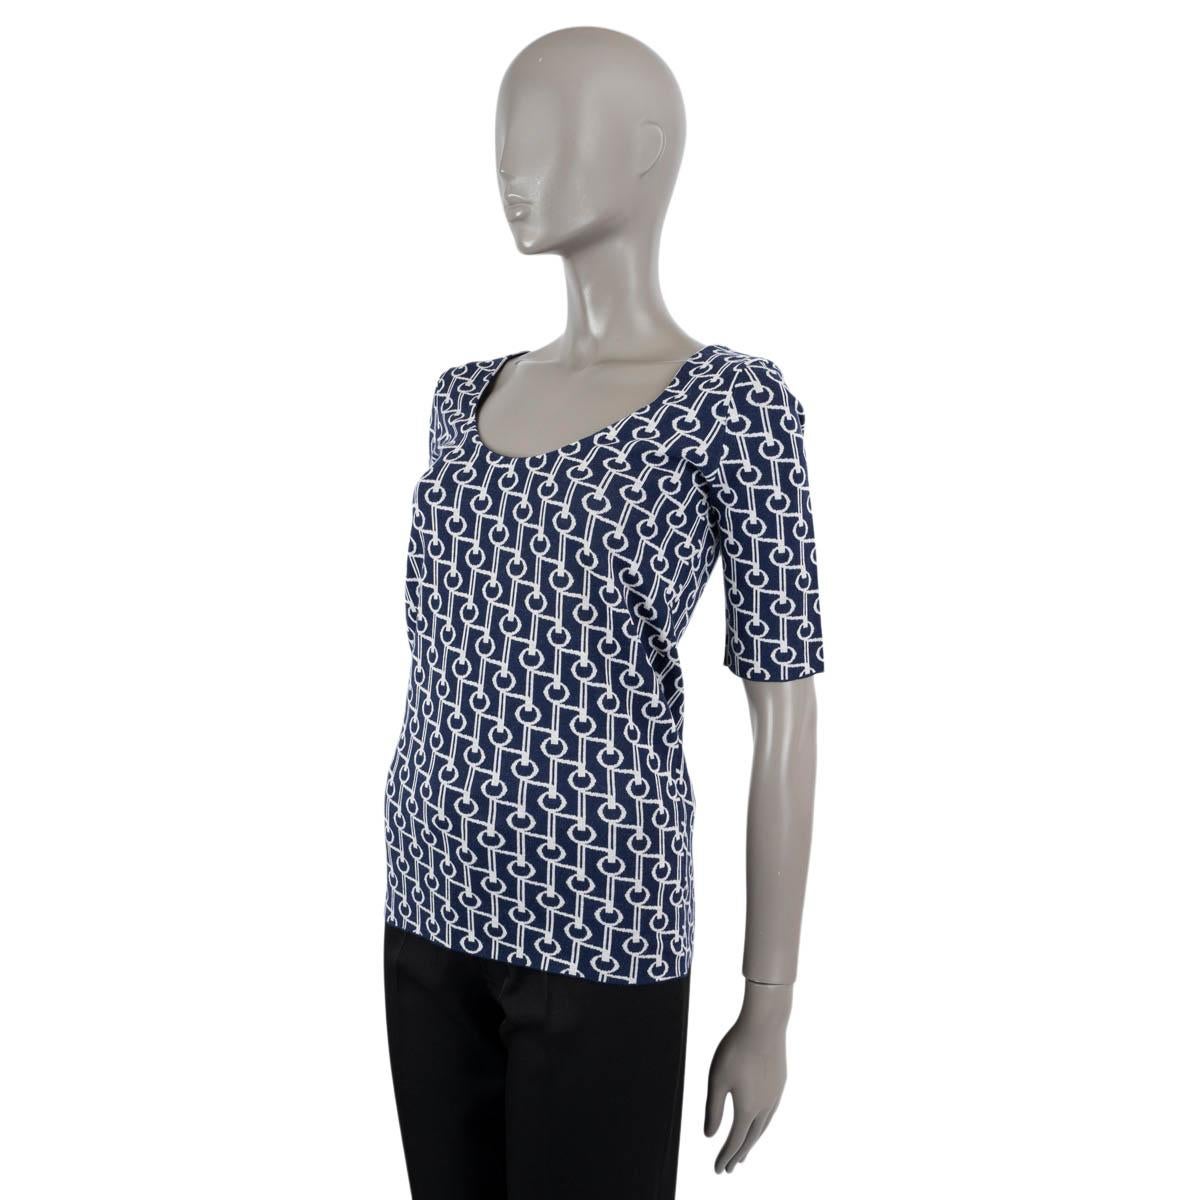 PRADA navy & white wool GEOMETRIC JACQUARD KNIT Top Shirt 40 S In Excellent Condition For Sale In Zürich, CH